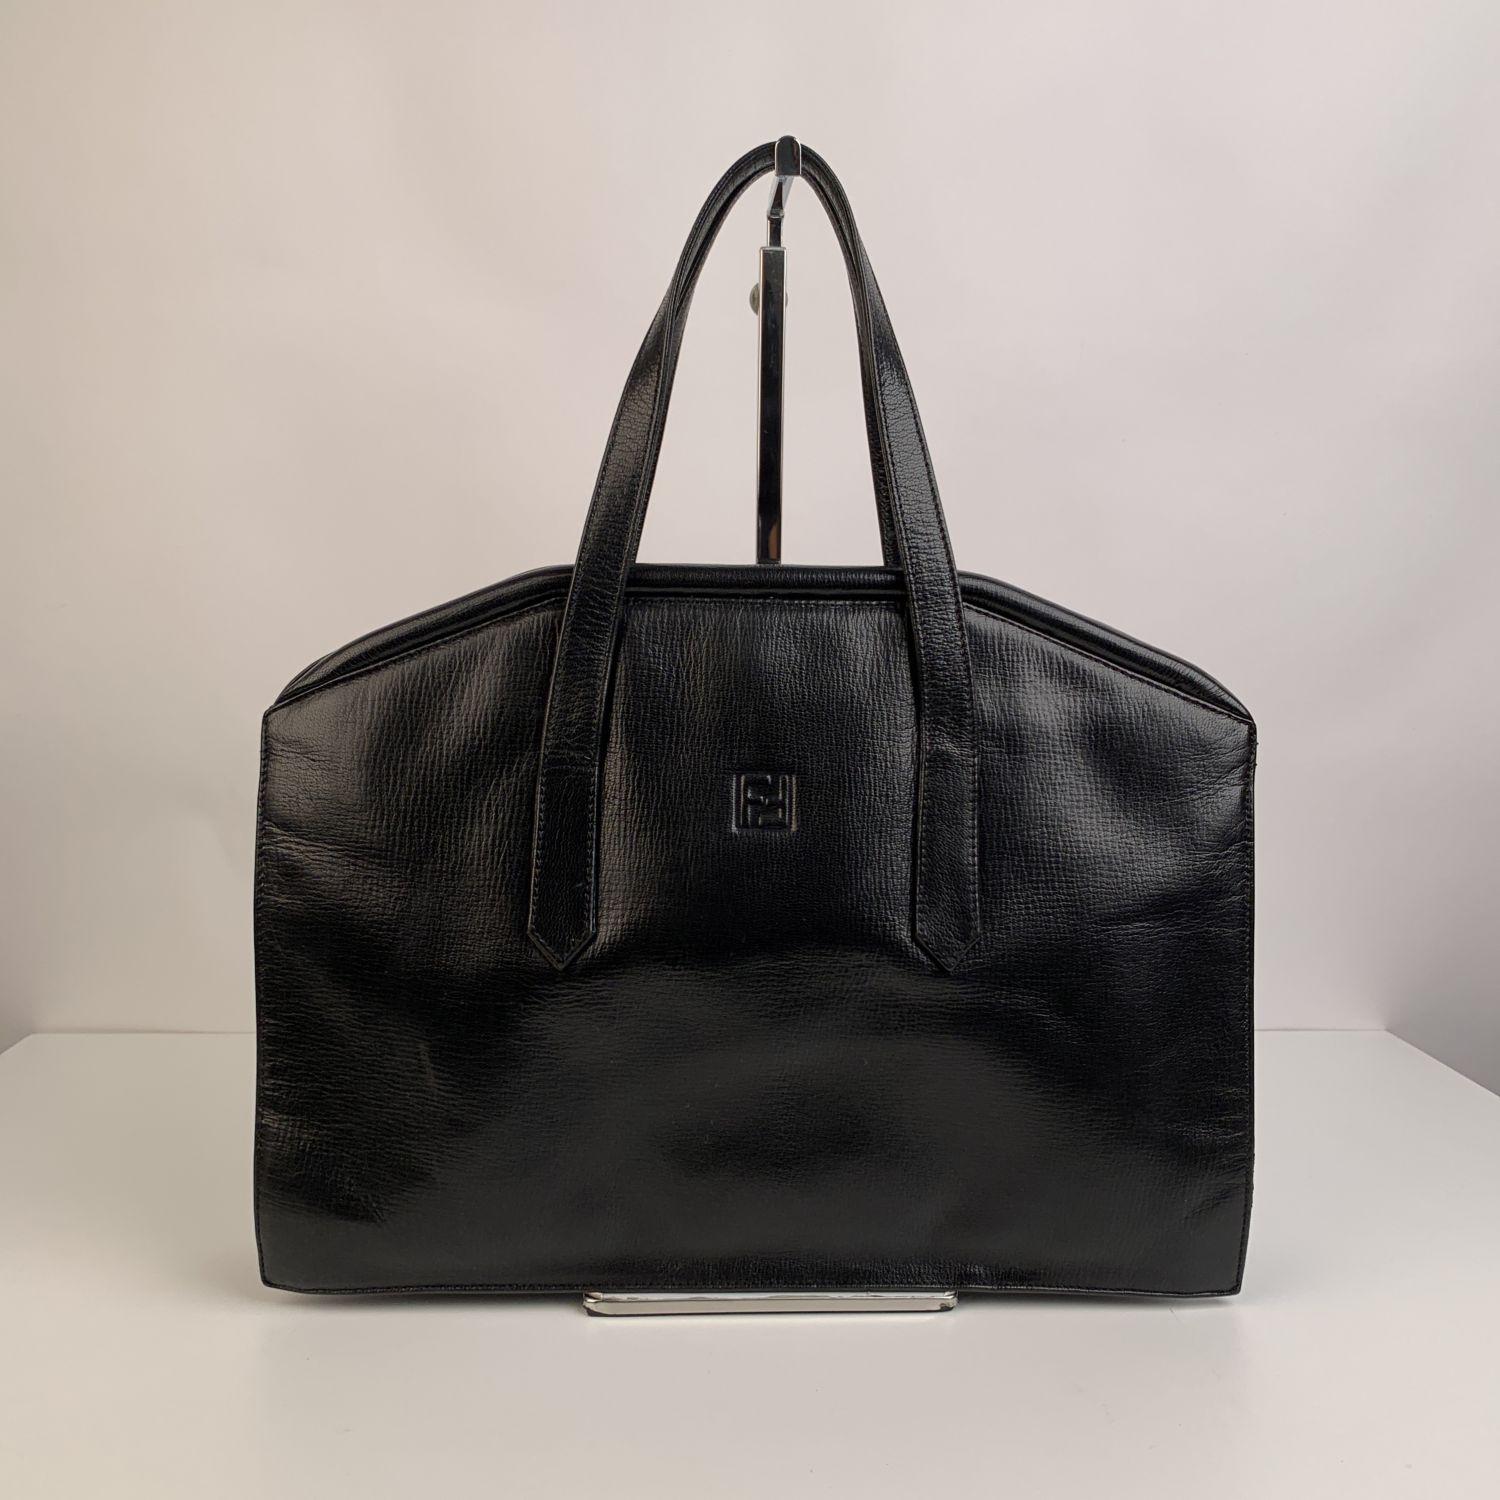 Vintage satchel bag by FENDI, crafted in black leather. Framed top with kiss lock closure. 1 open section on the front and 1 open section on the back. 1 side zip pocket inside. FF - Fendi logo on the front, 'Fendi s.a.s. Roma - Made in Italy' tag